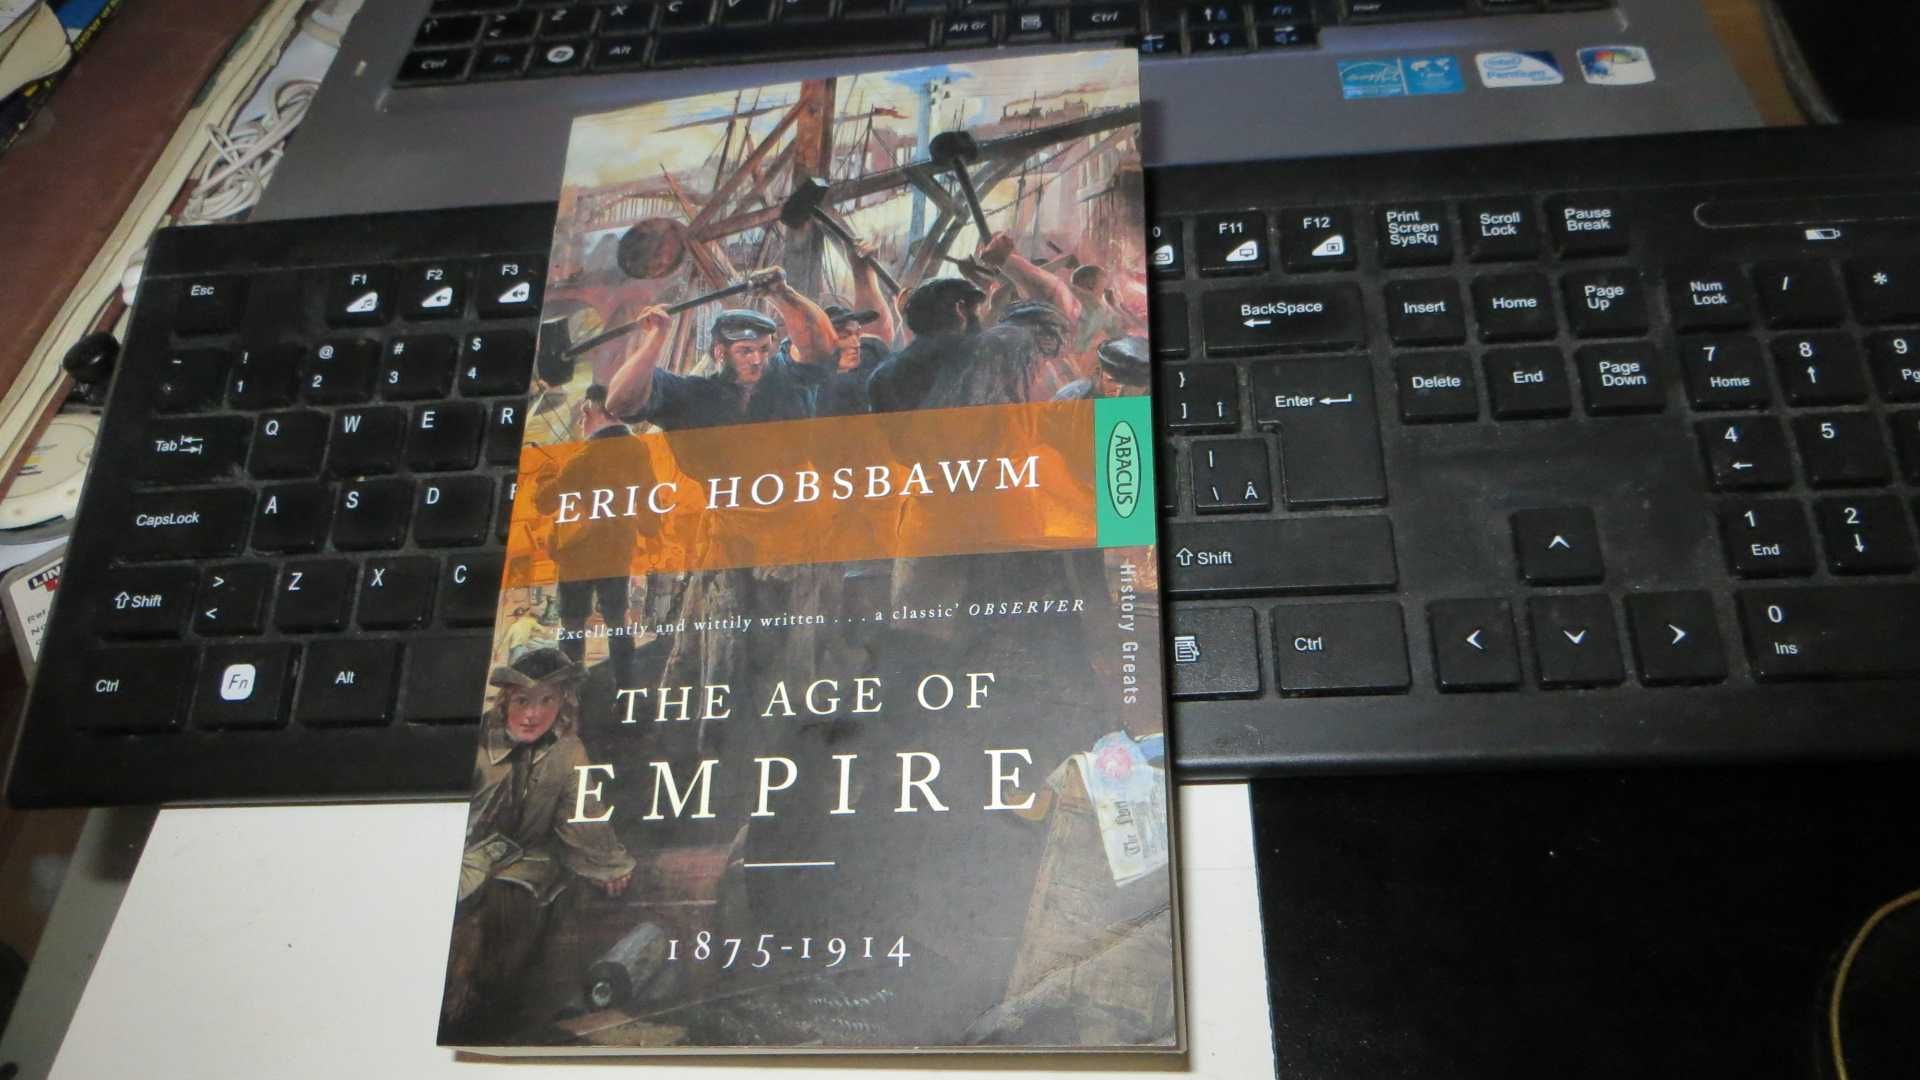 Eric Hobsbawm "The Age of Empire 1875-1914" Abacus UK 1994 English